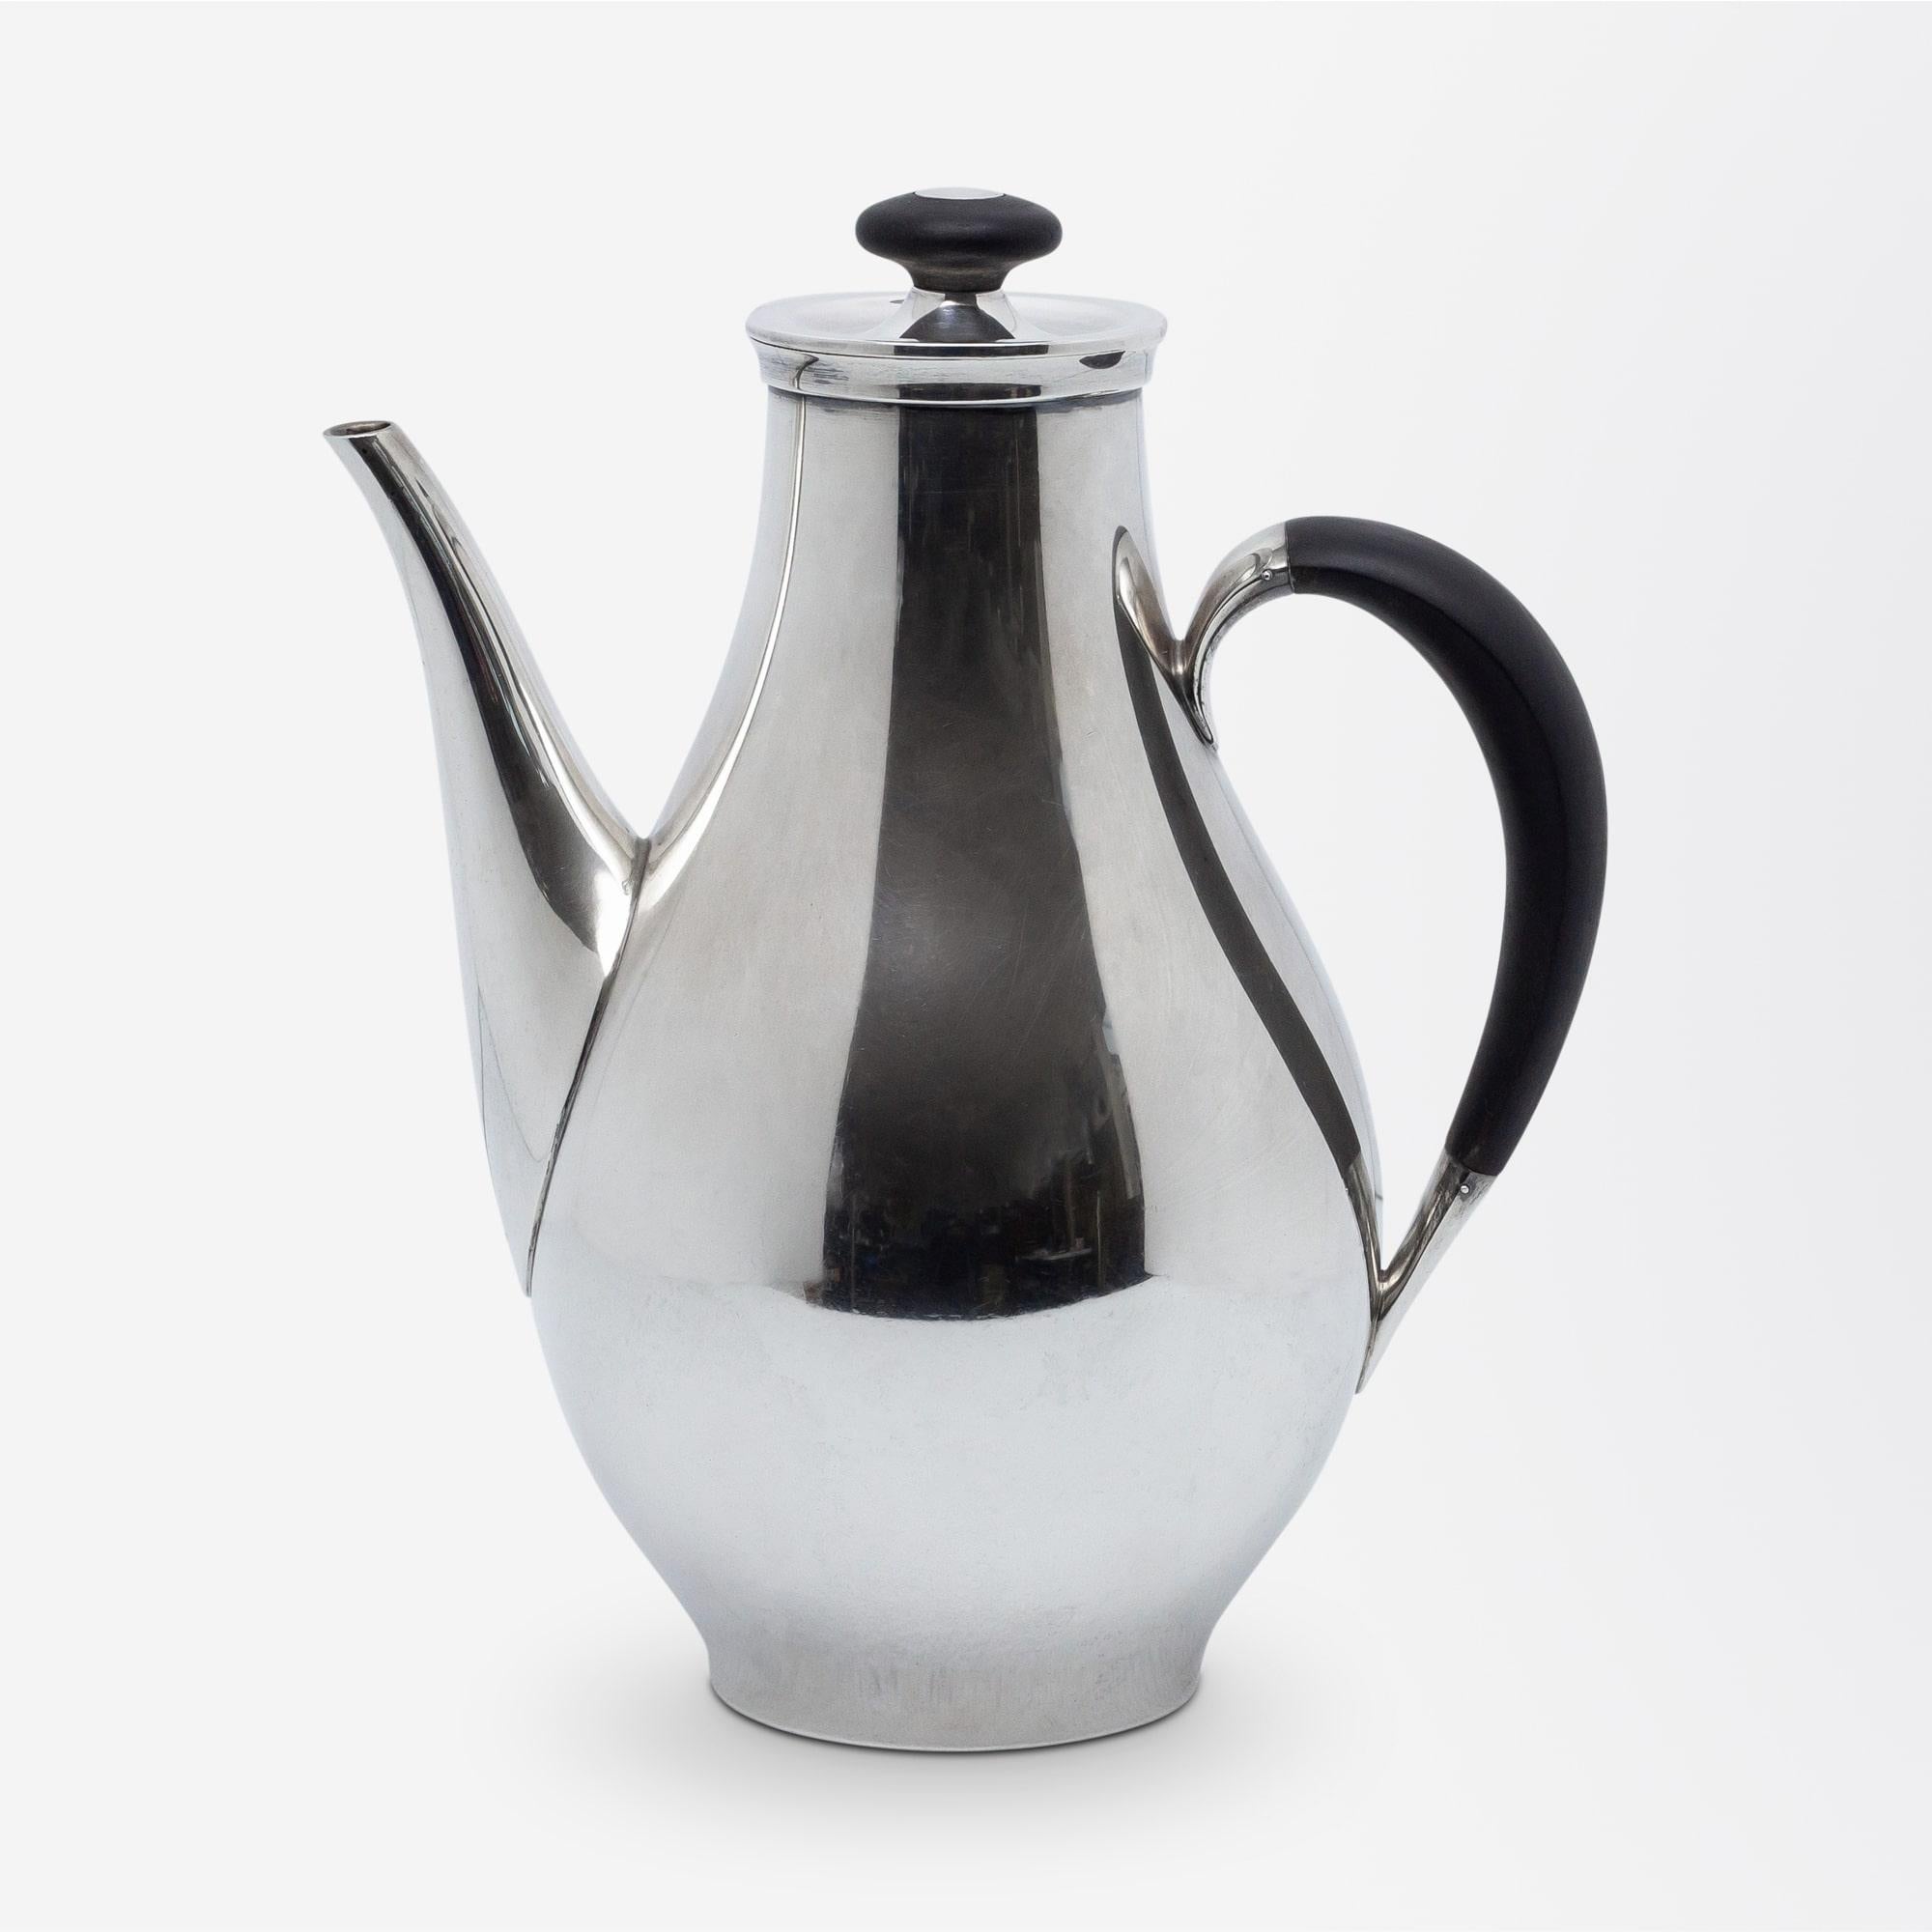 A three-piece coffee set in sterling silver and ebony by American maker Gorham, circa 1956. The service which was designed by Philip B. Johnson is Gorham's 'Directional' pattern which perfectly demonstrates the influence of biomorphic aesthetics in